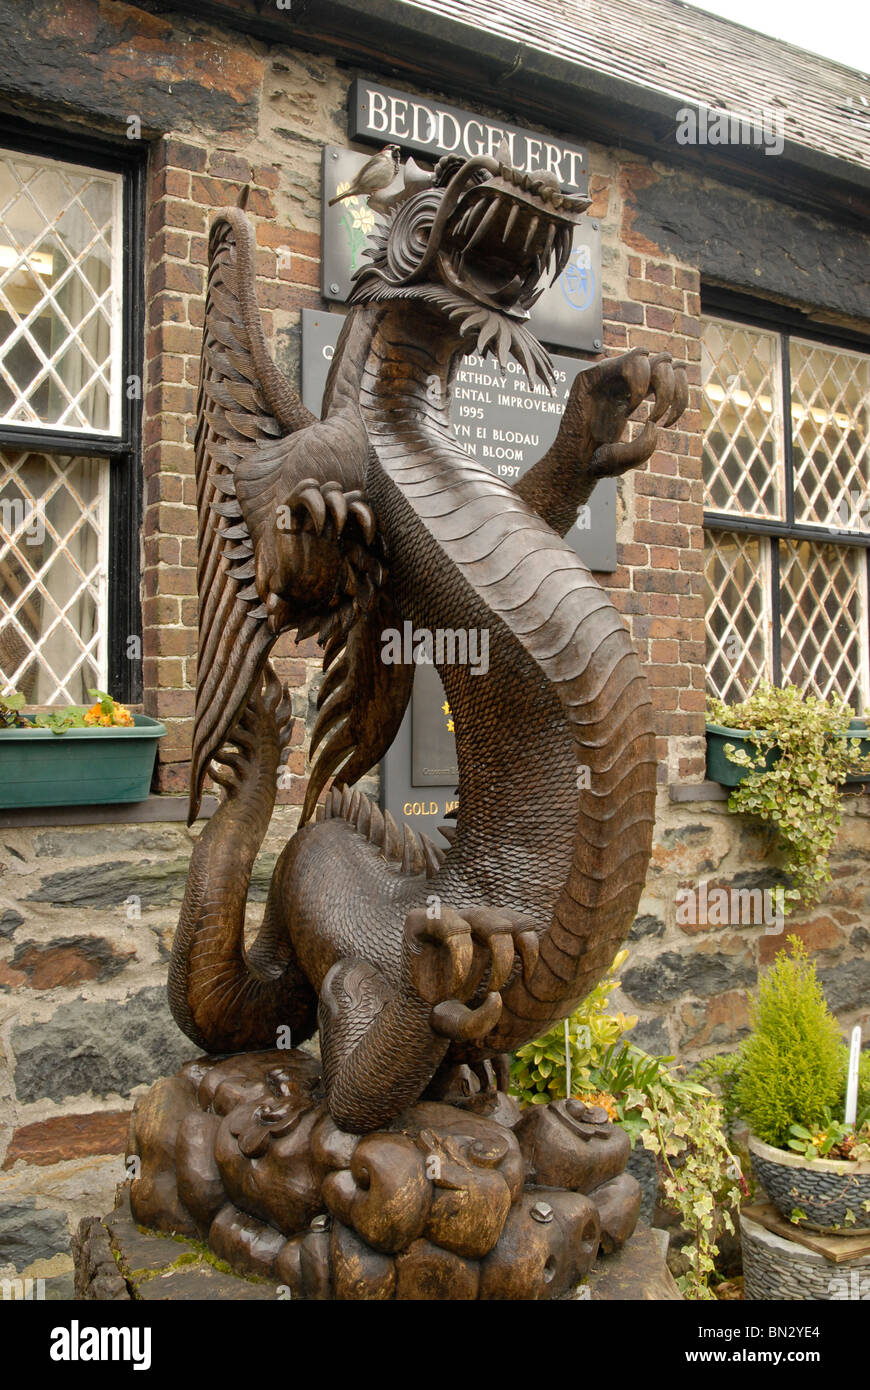 Large carving of the welsh dragon in Beddgelert, Snowdonia, Wales, with a sparrow sitting on its head Stock Photo